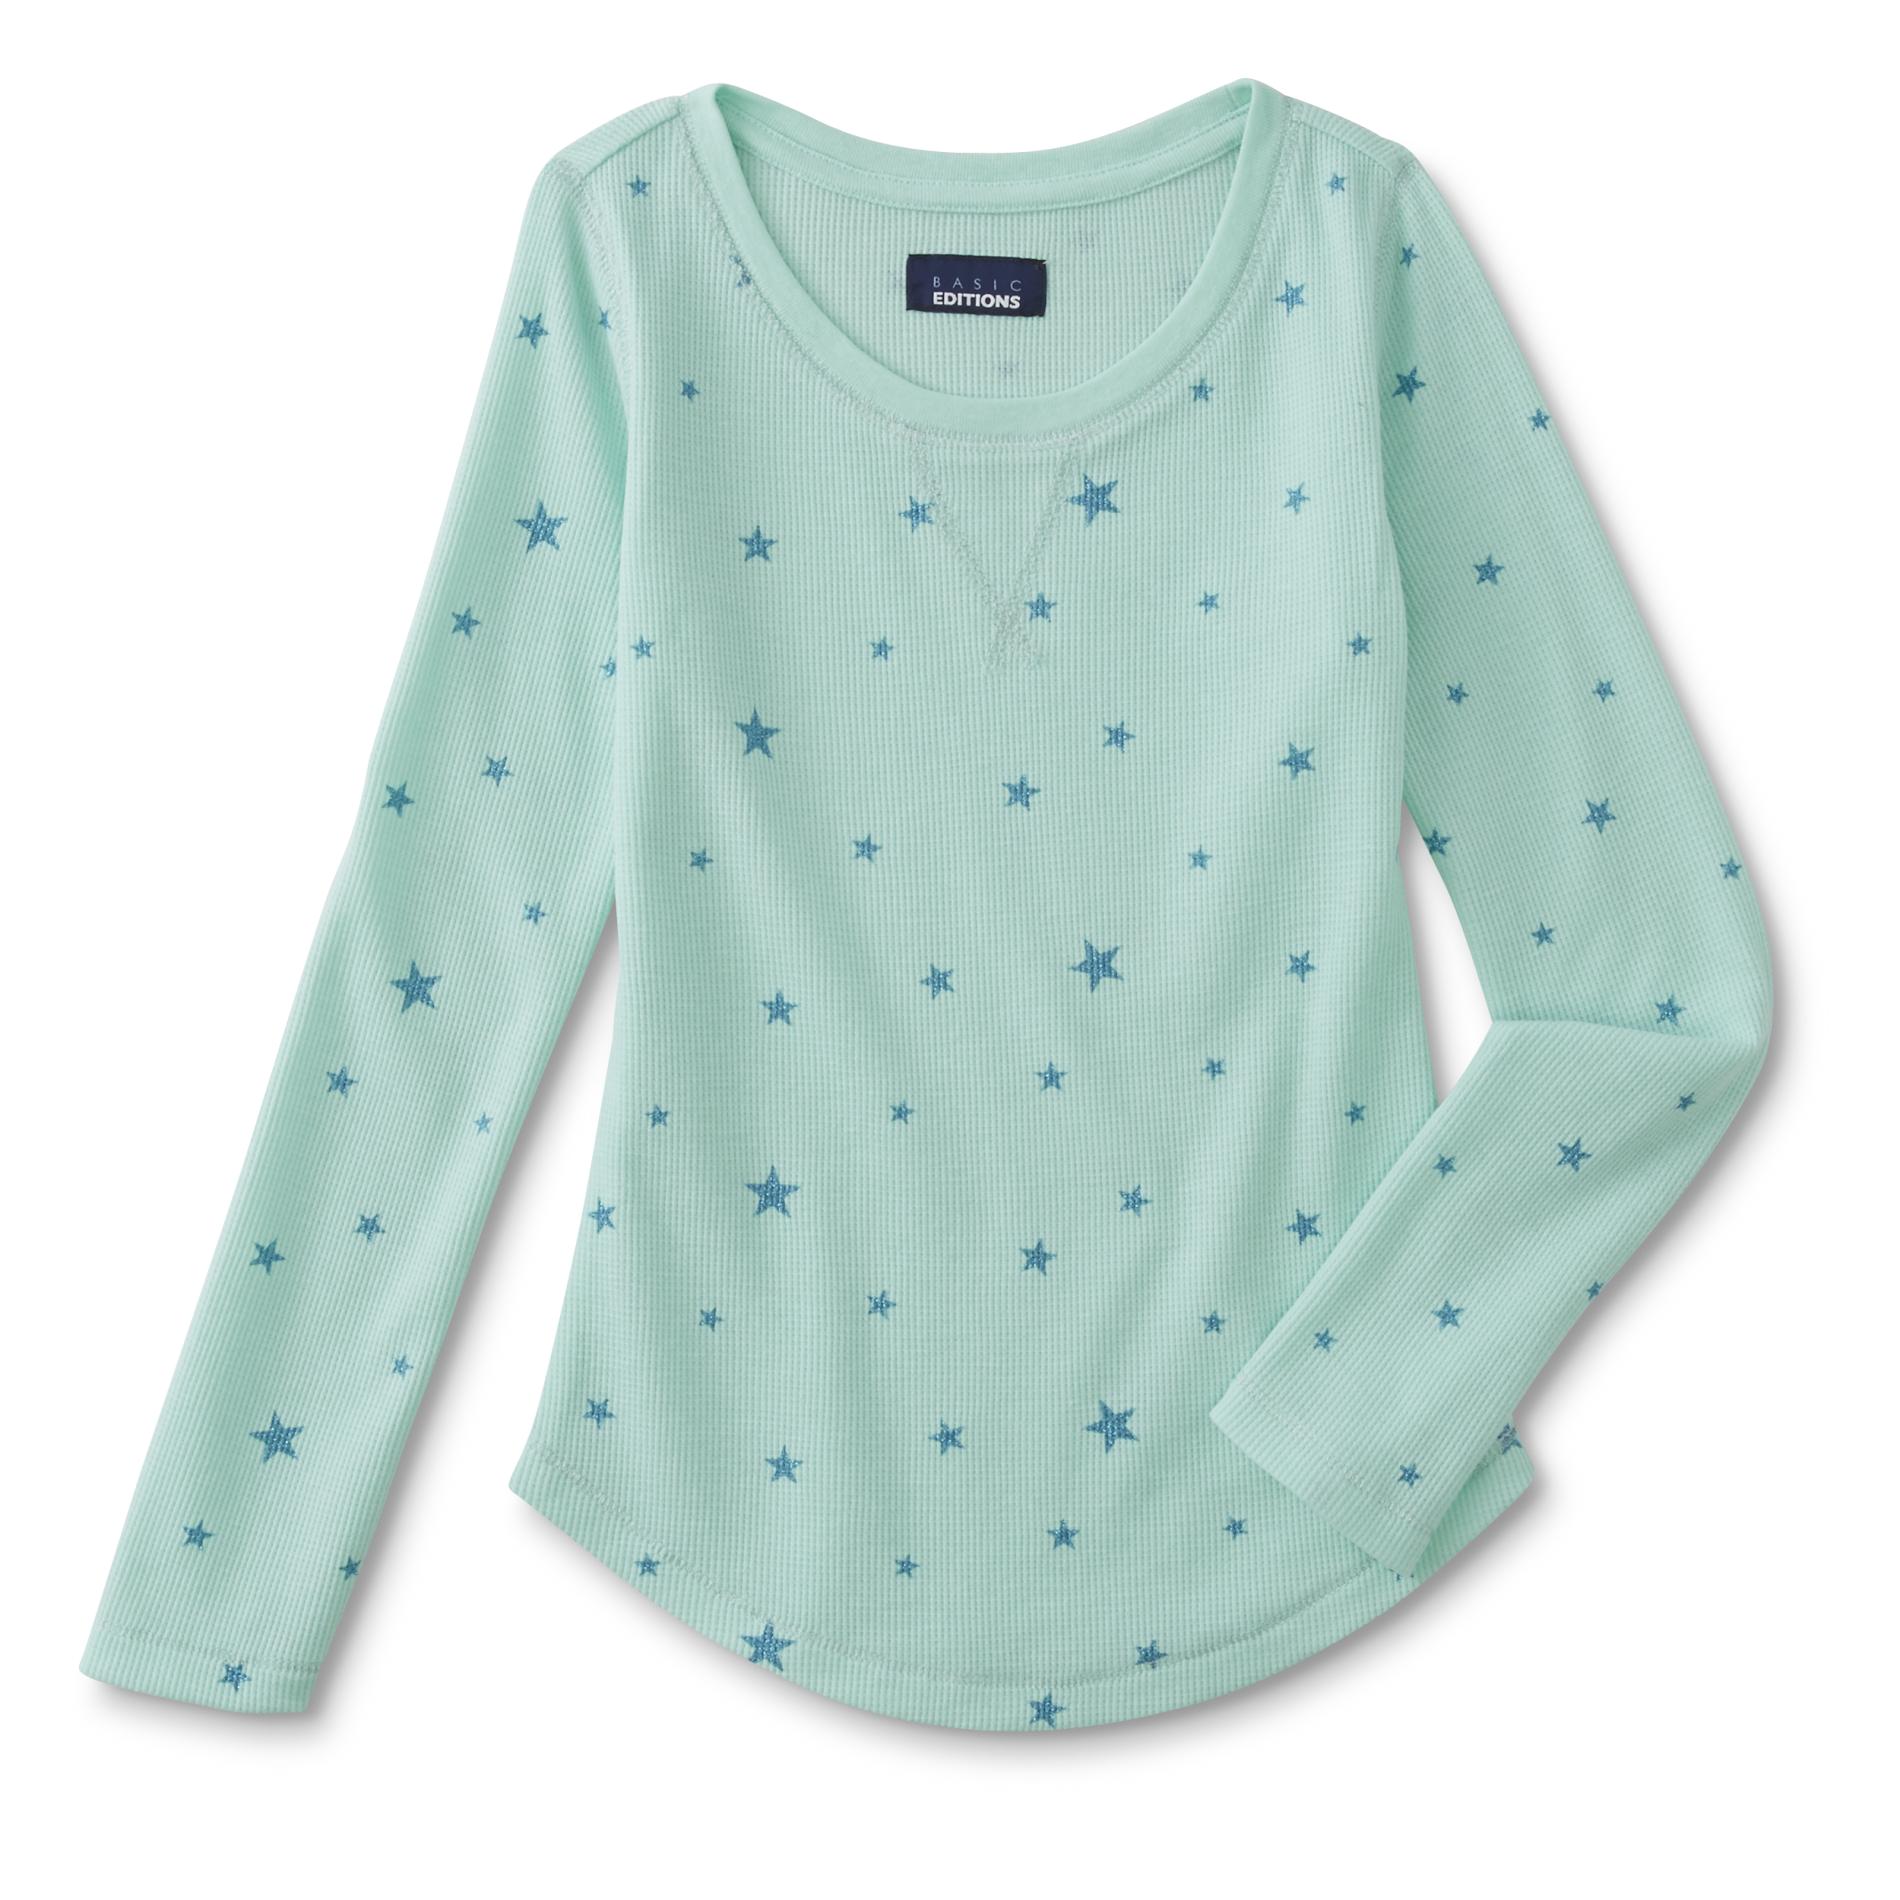 Basic Editions Girl's Long-Sleeve Thermal Top - Stars